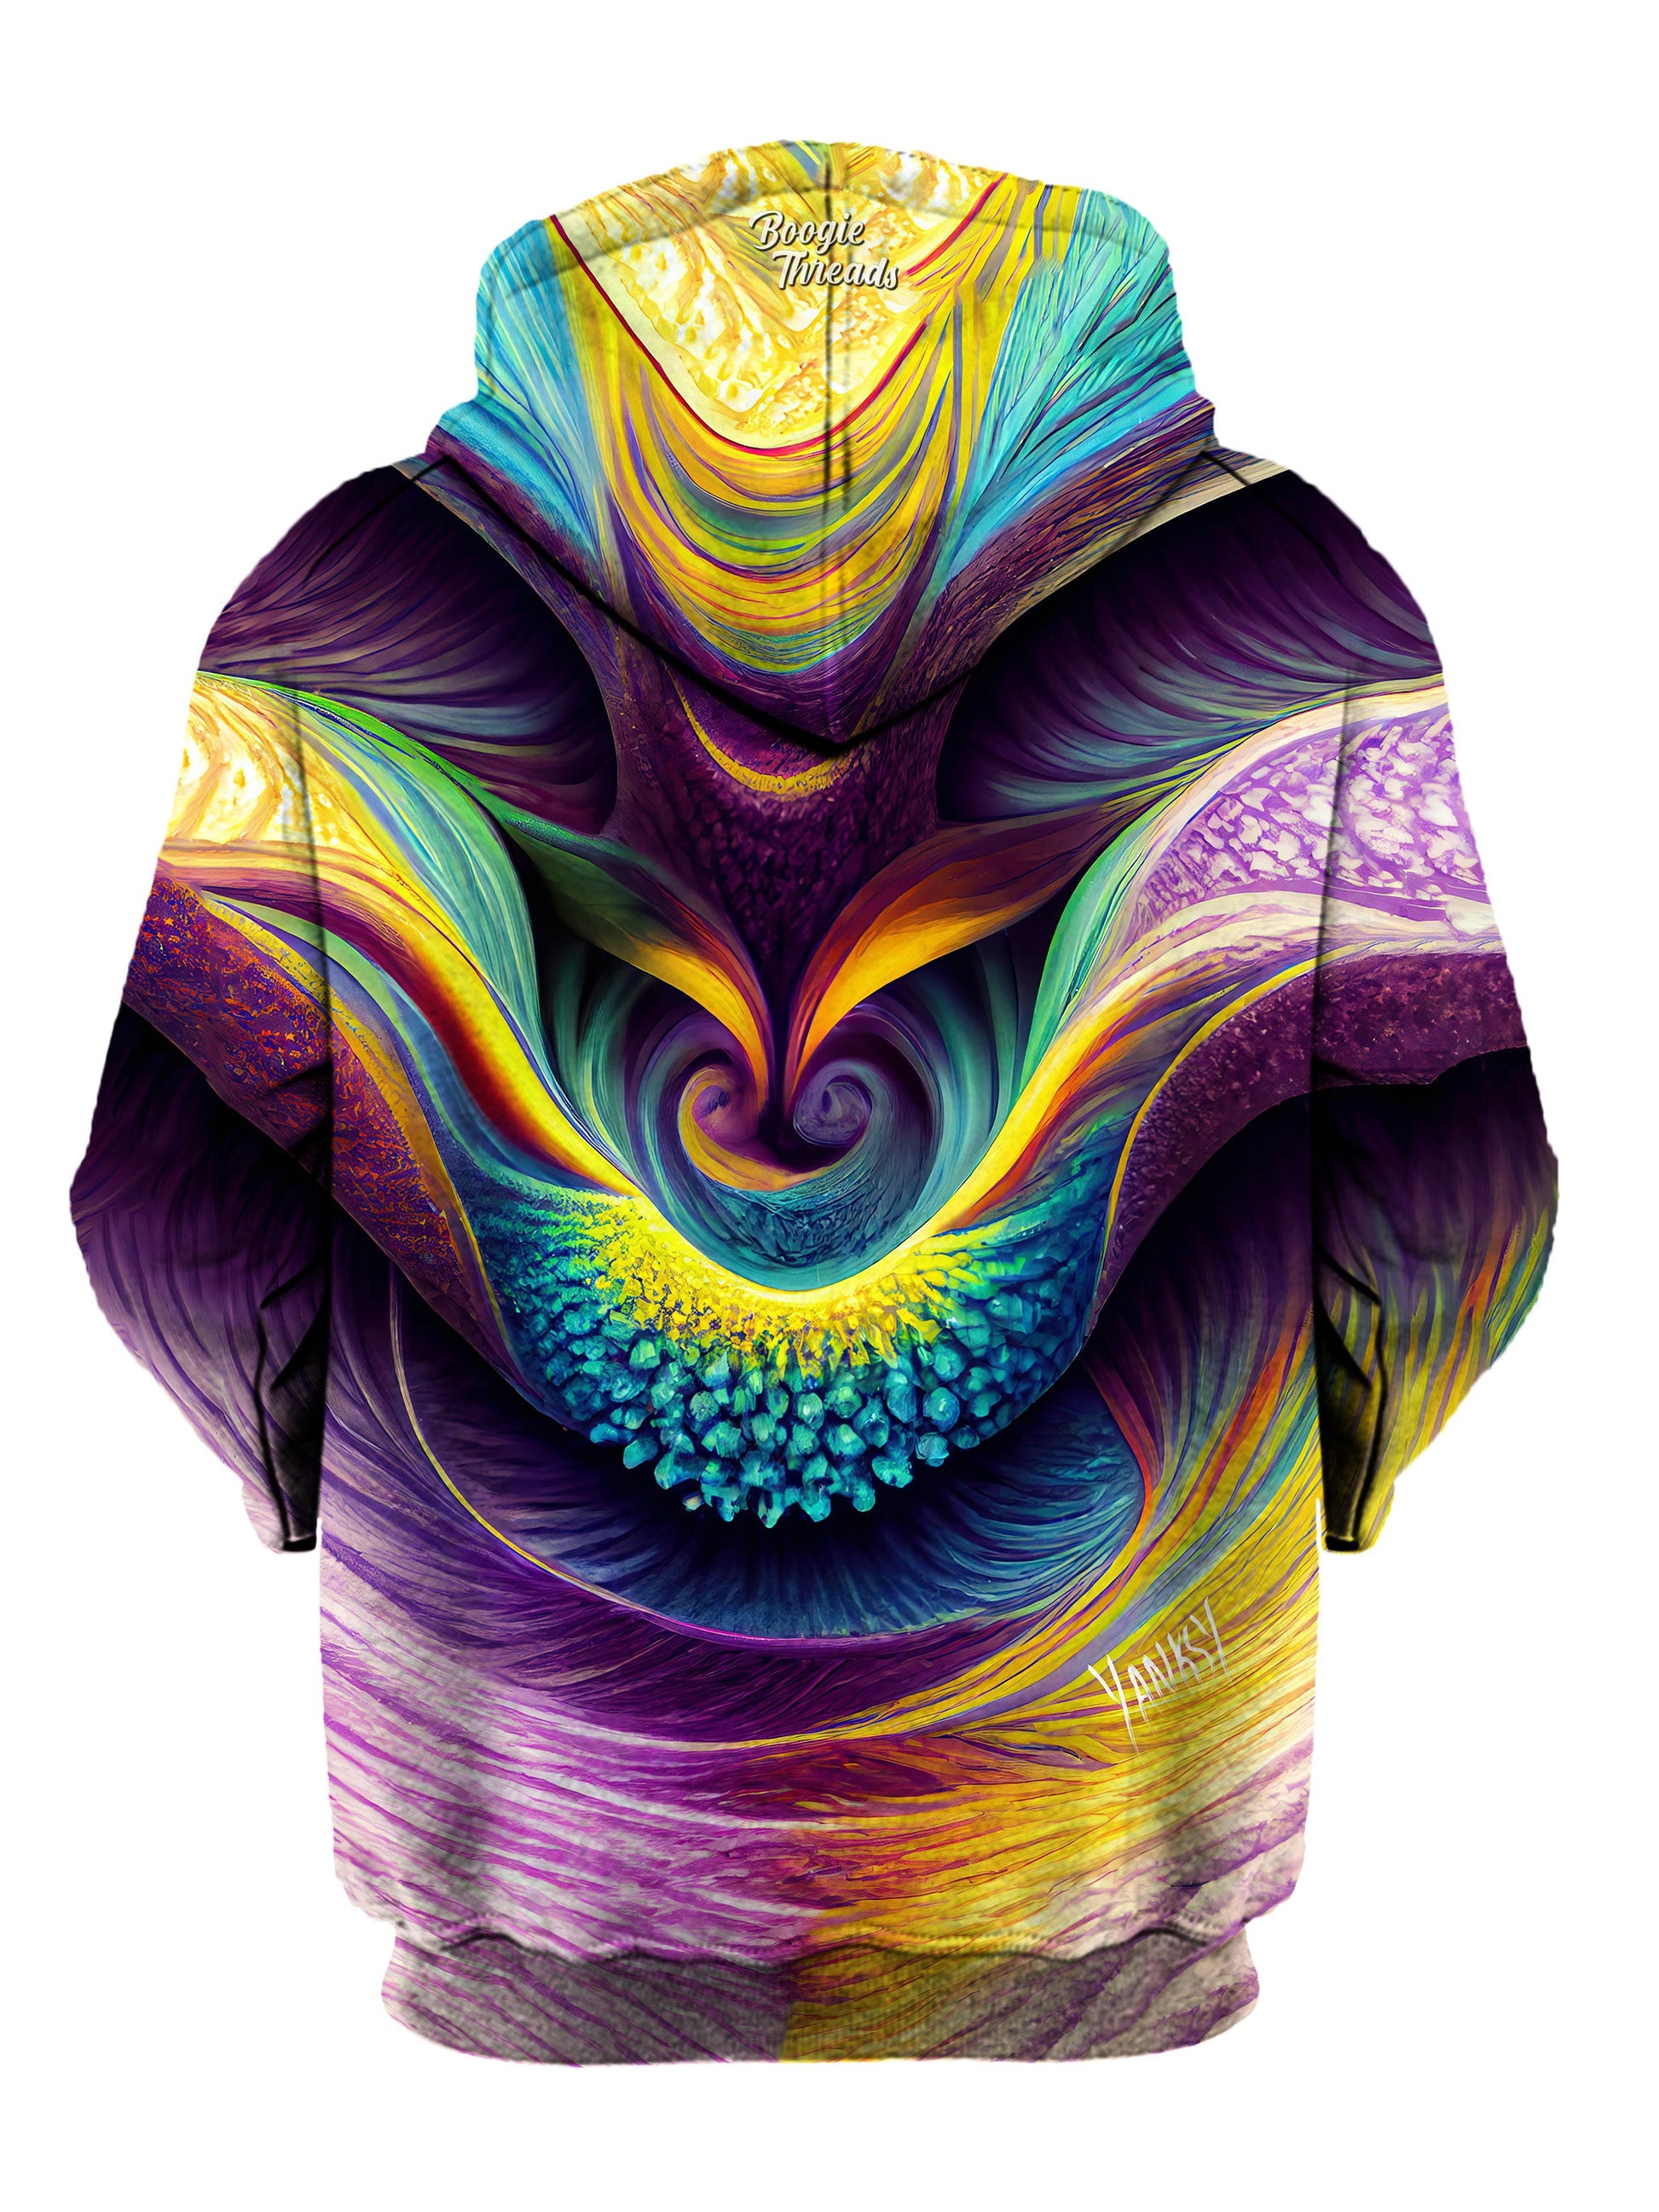 Get ready to dance the night away in this stylish and comfortable hoodie